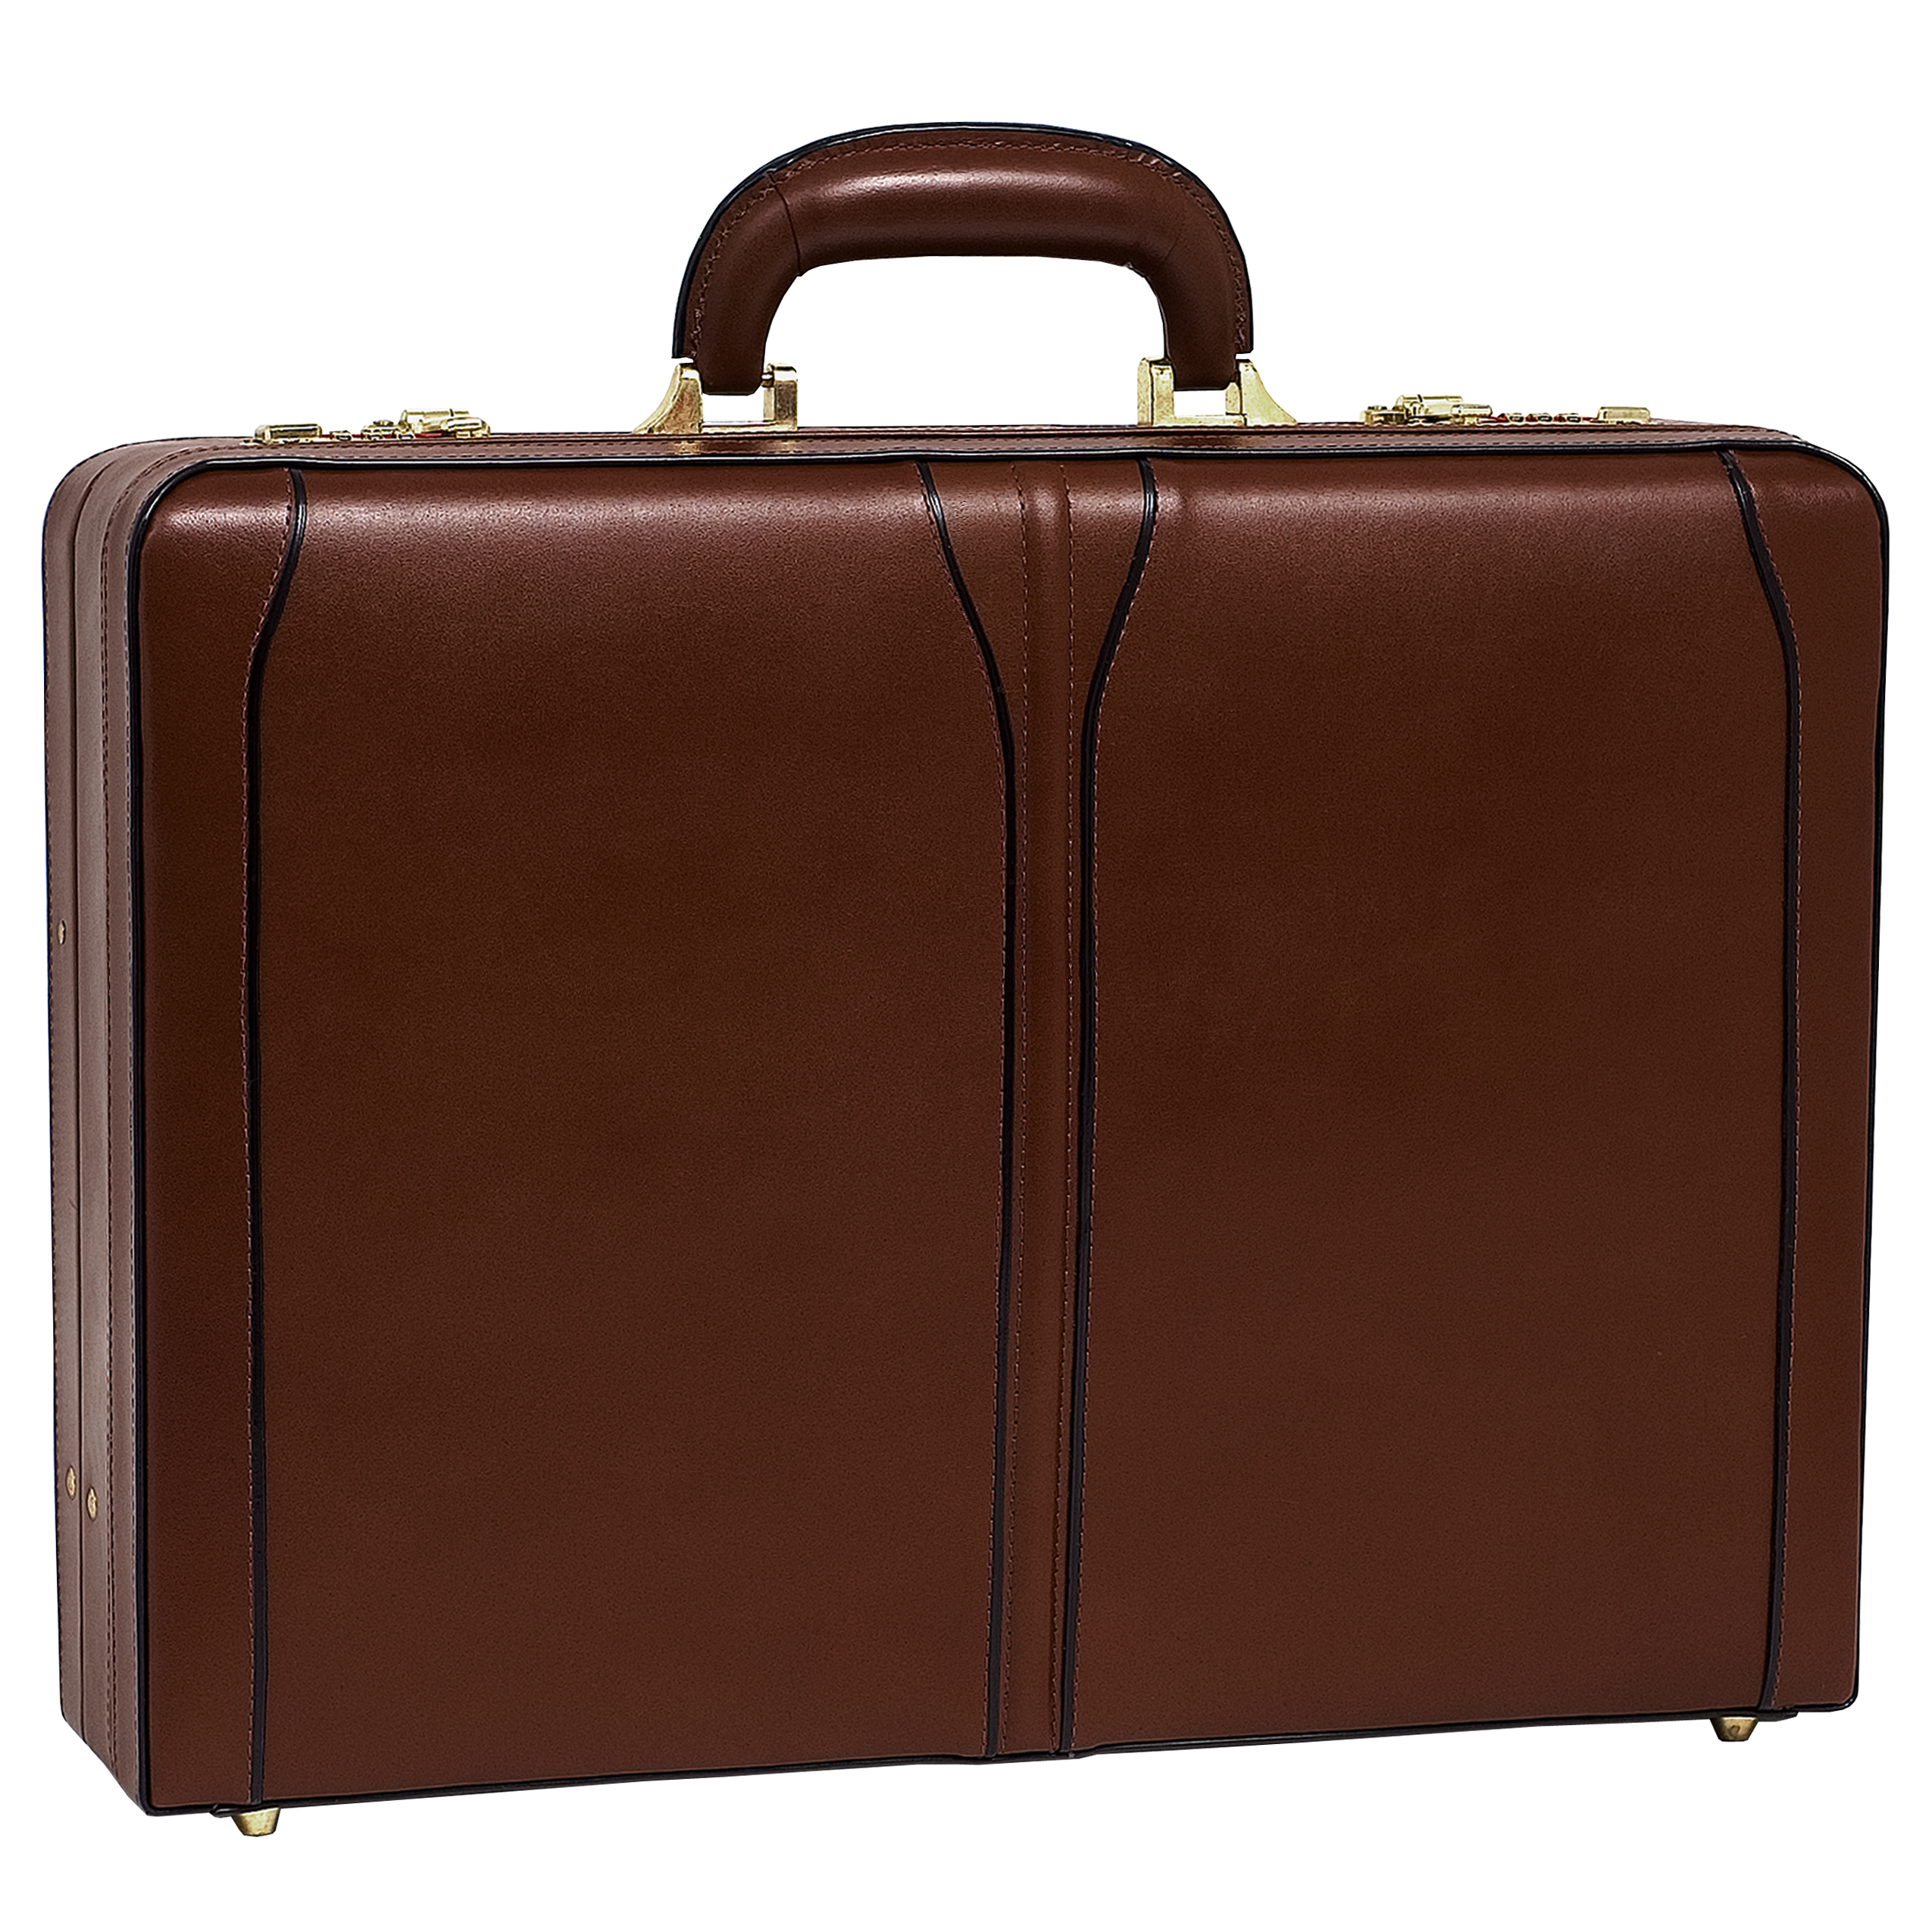 Turner Brown Leather Expandable Attache Case